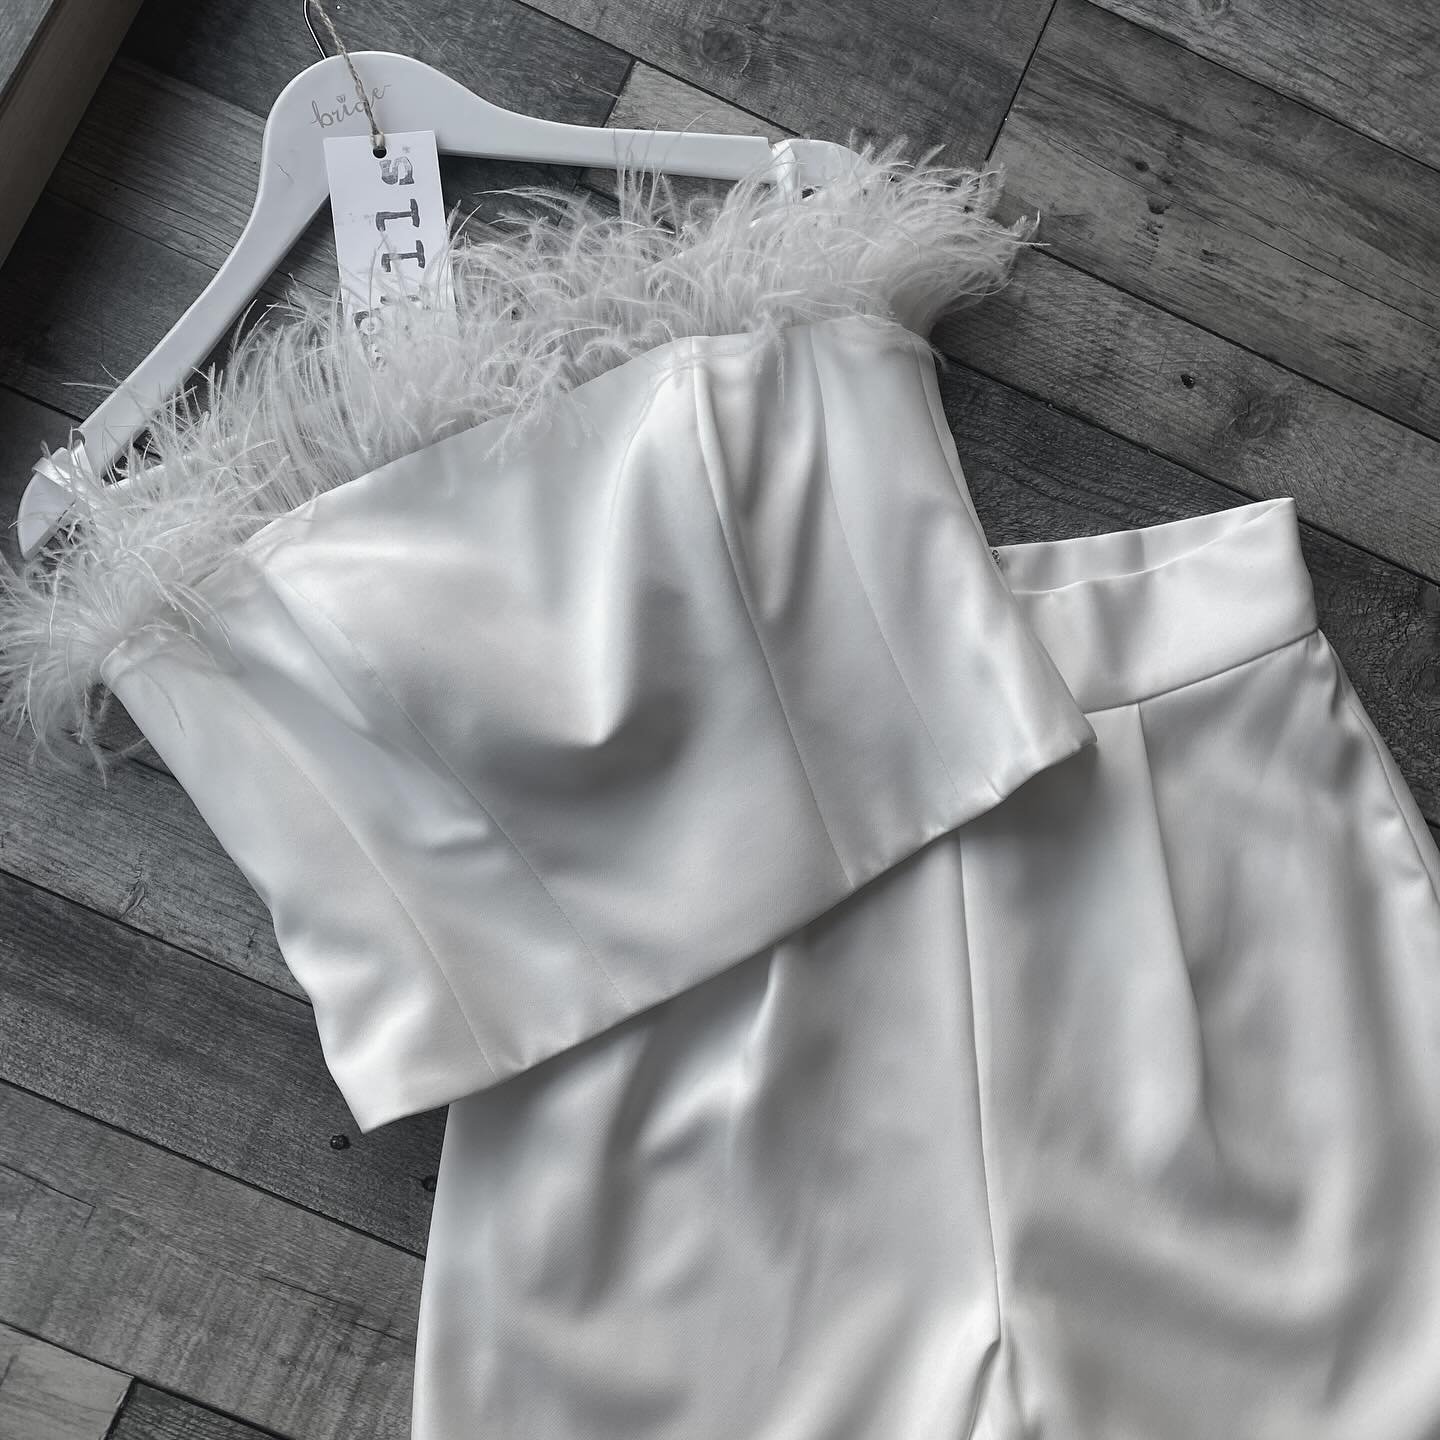 Two pieces are so IN right now&hellip; Brides you are all loving evening and second look options!🔥❤️&zwj;🔥

How unreal is this @kelseyrosebridal corset top and crepe trousers?!😍

More evening understated bridal coming real soon🎇